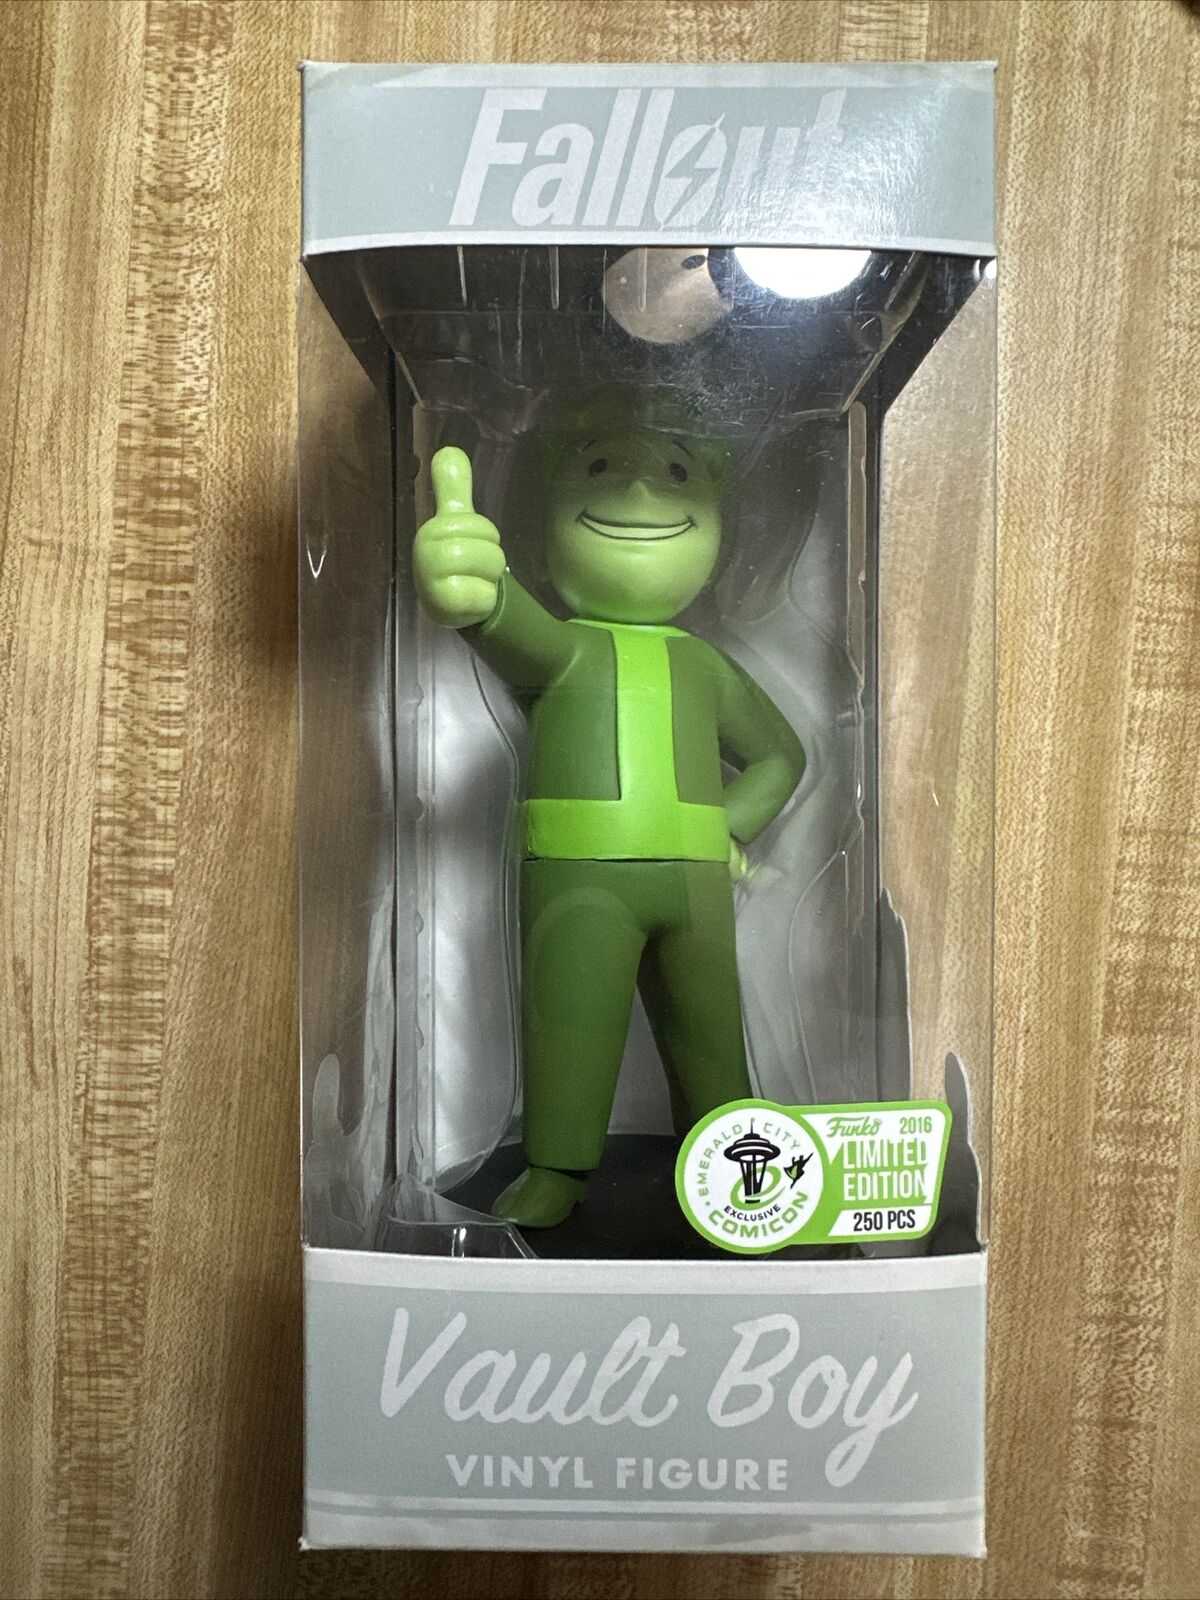 Funko Fallout - Vault Boy - ECCC - 1 Of 250 VAULTED AND HTF - Comic Con Release